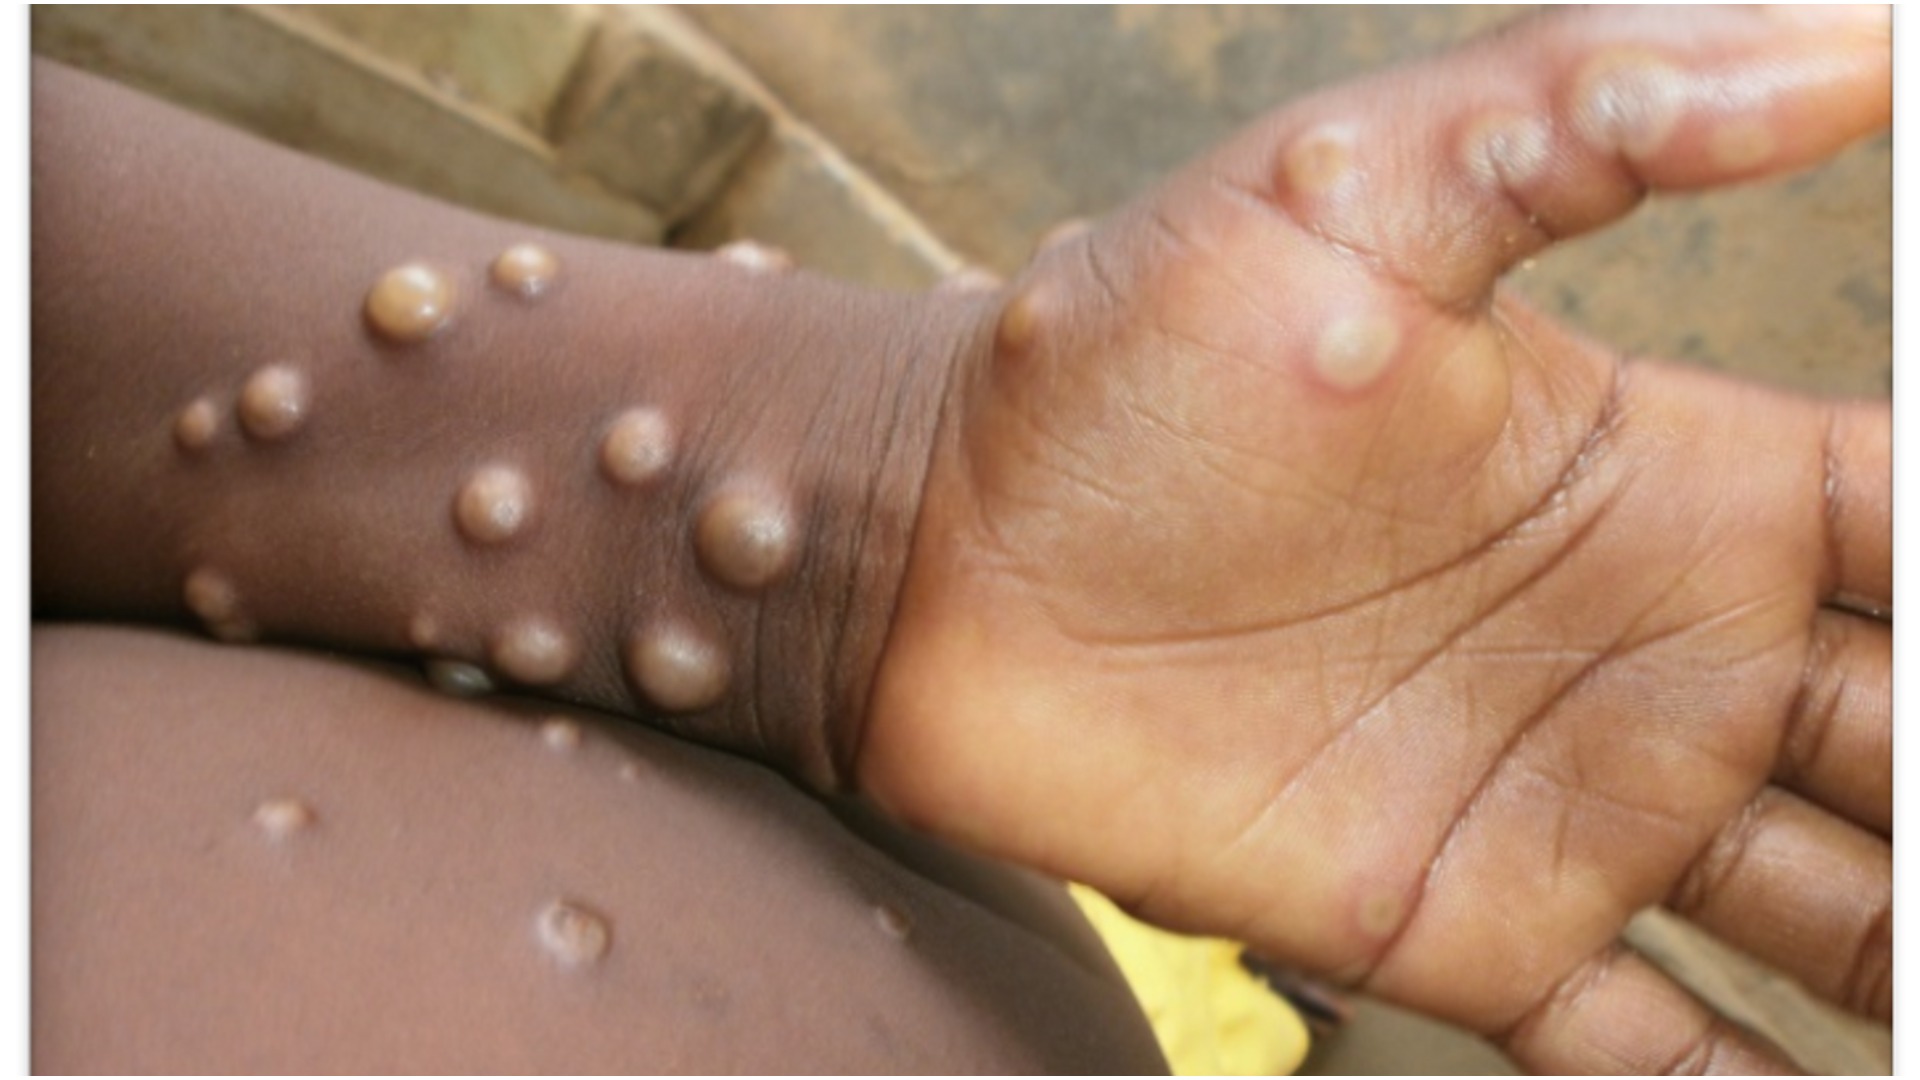 Monkeypox Confirmed In South Africa: Here Is What You Need To Know About The Disease